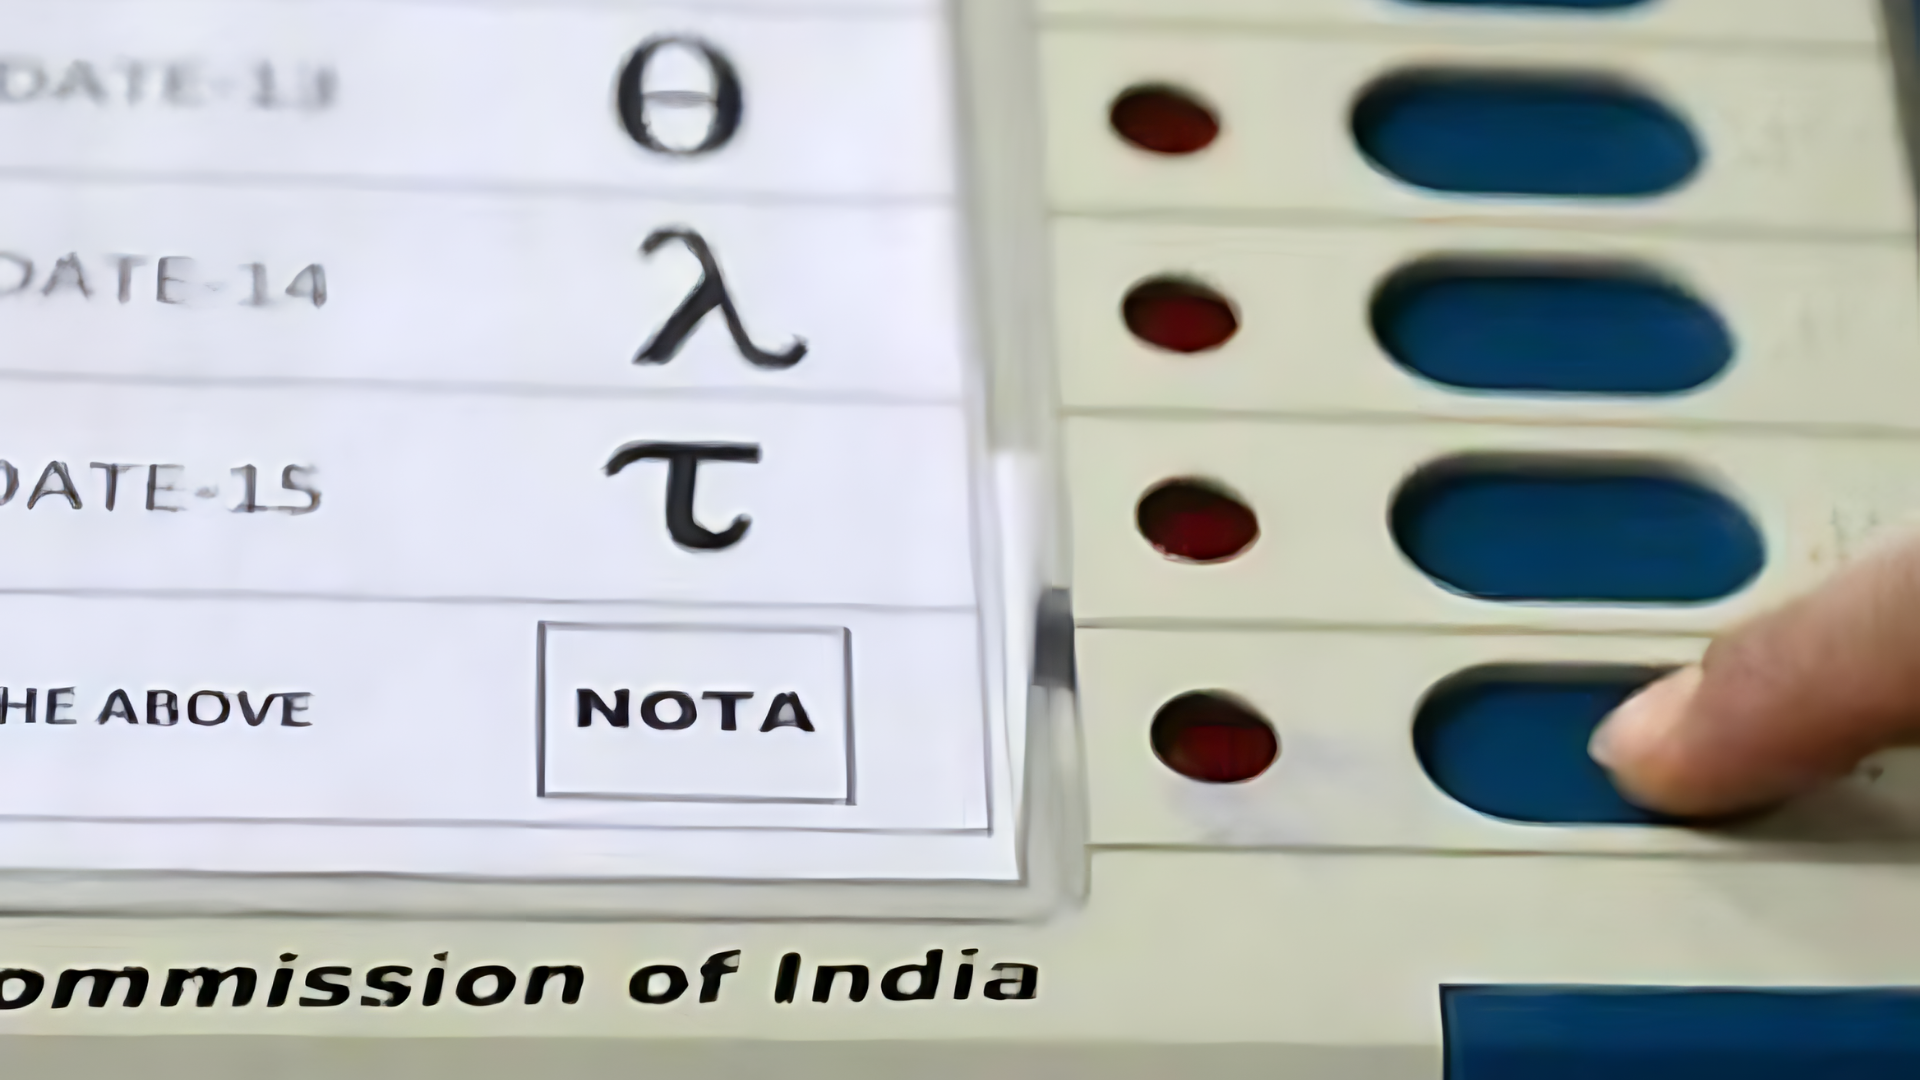 What Will Happen If NOTA Votes Surge? SC Issues Notice To Poll Body